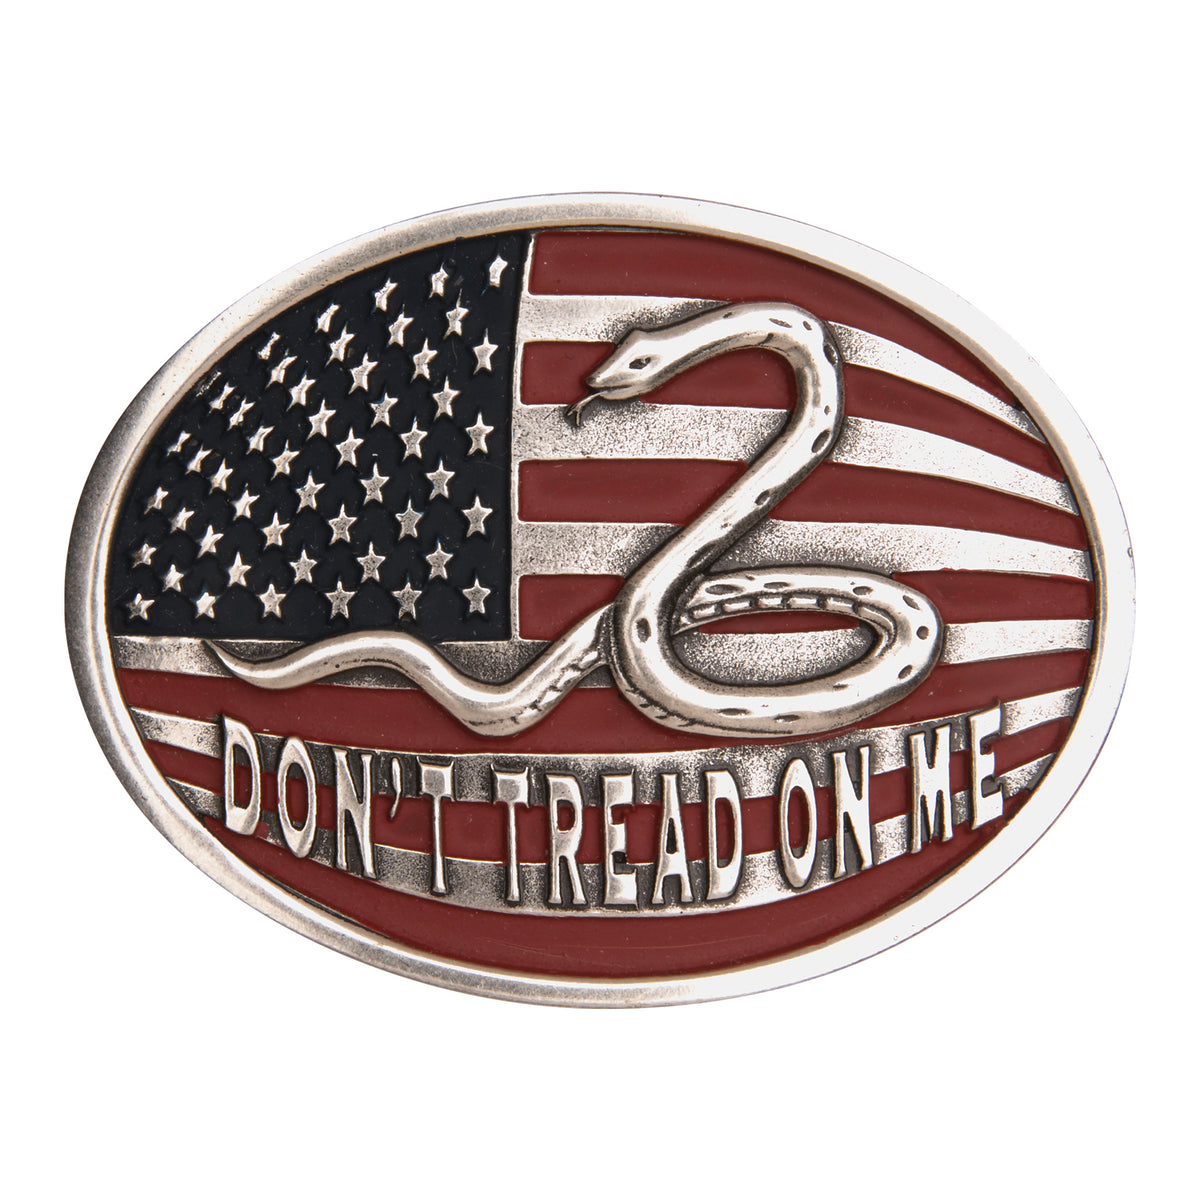 Don’t Tread on Me Buckle